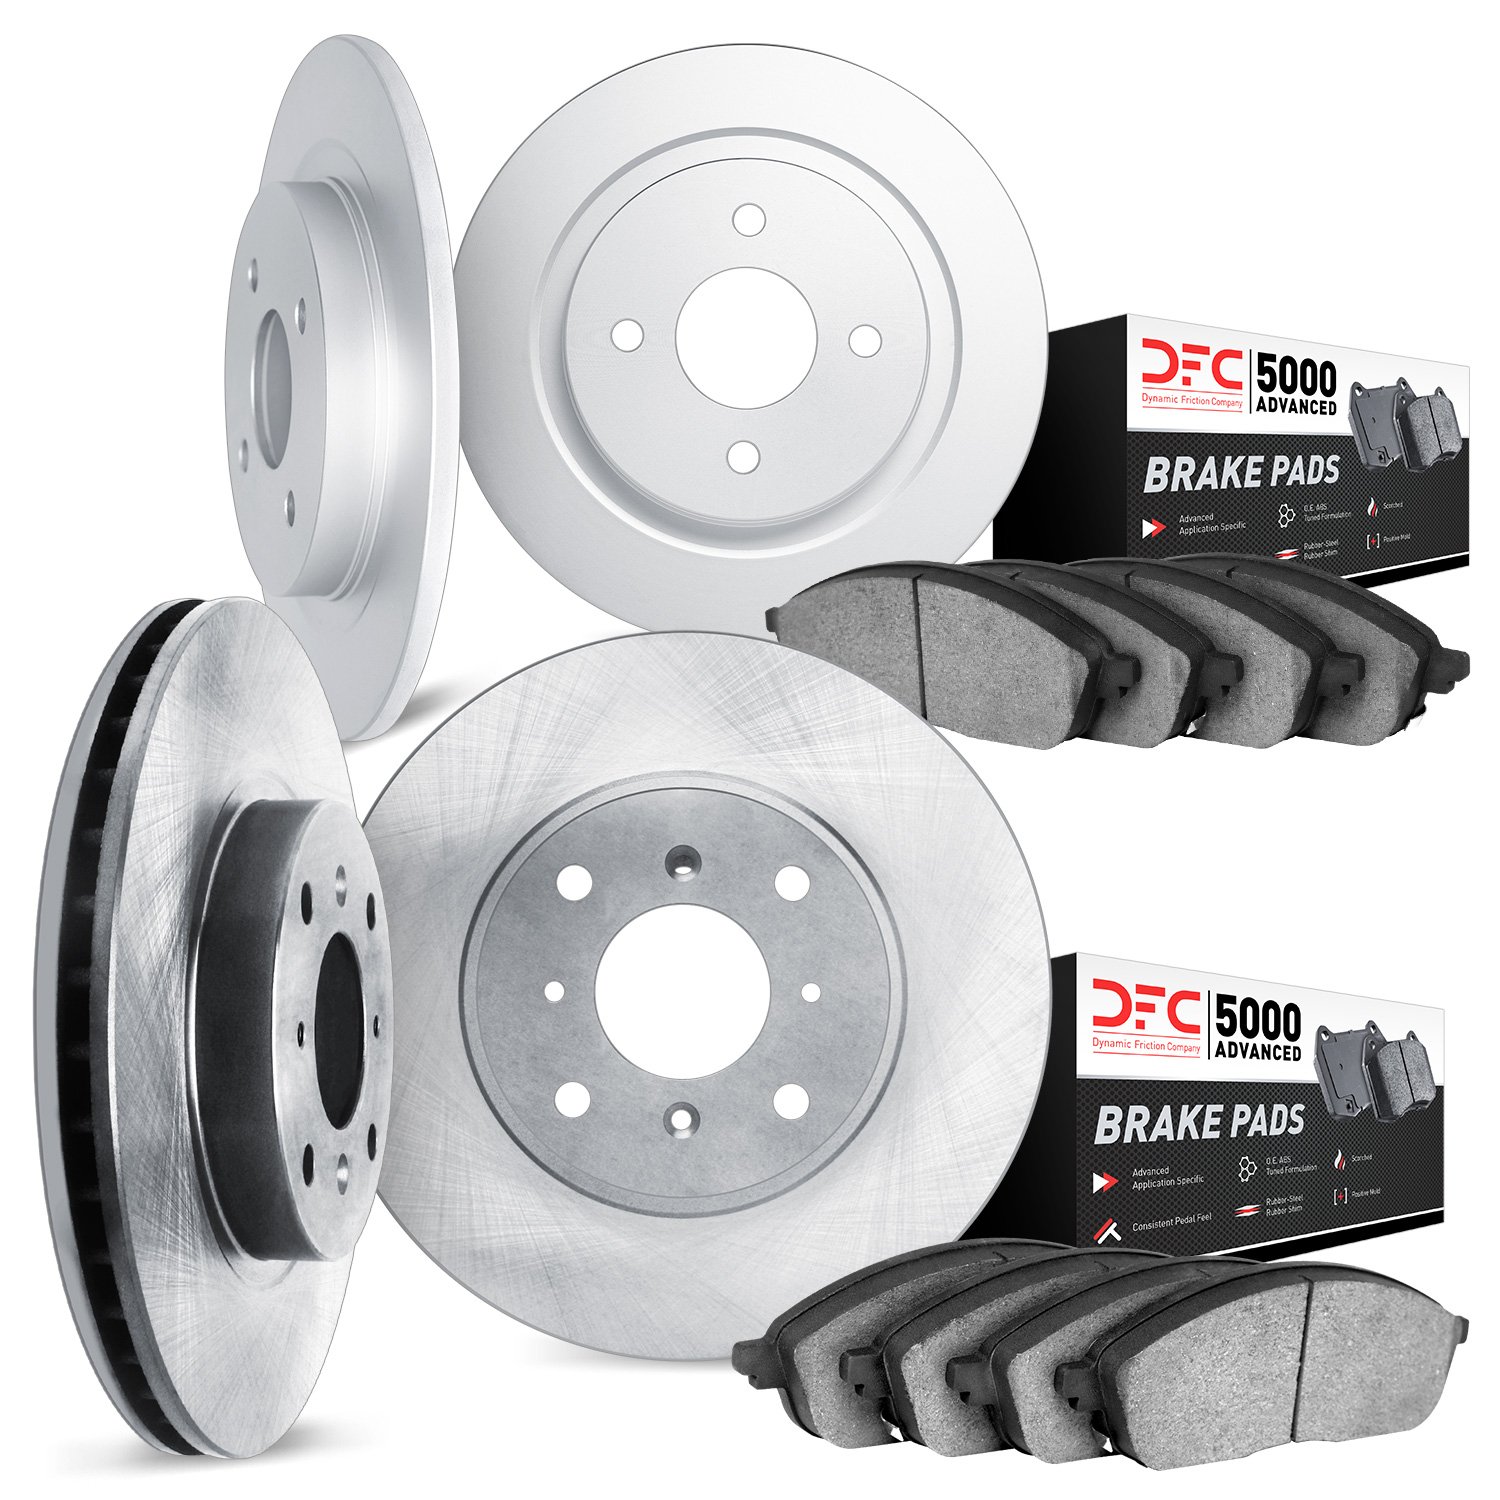 6504-65018 Brake Rotors w/5000 Advanced Brake Pads Kit, 1986-1986 GM, Position: Front and Rear